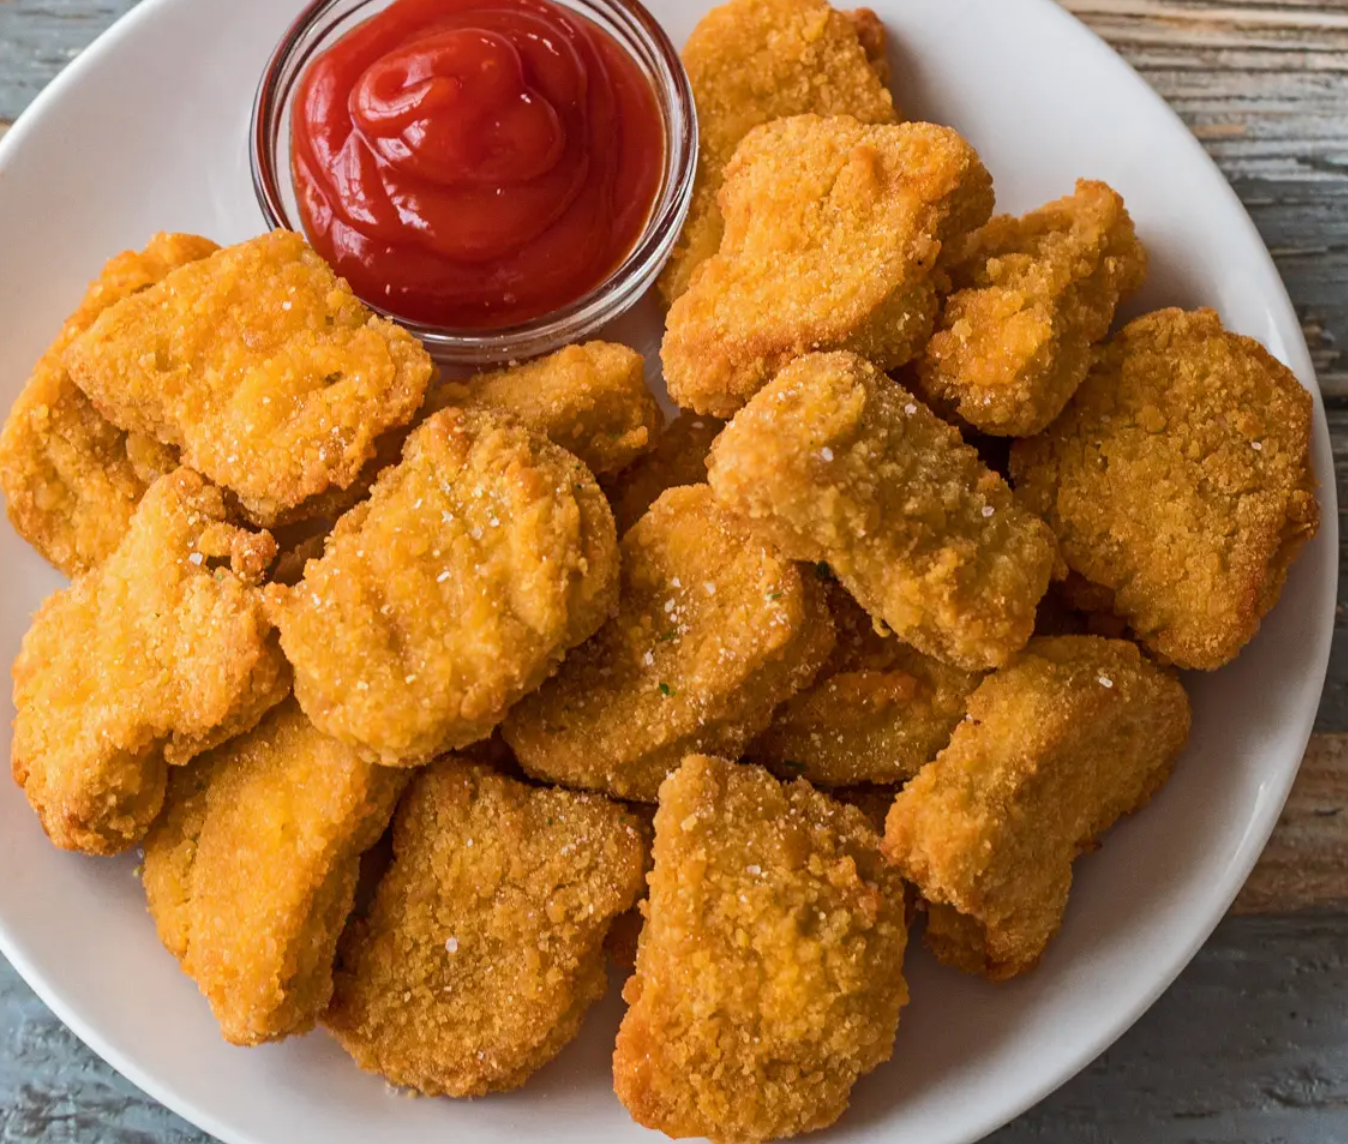 a plate of chicken nuggets with ketchup on the side